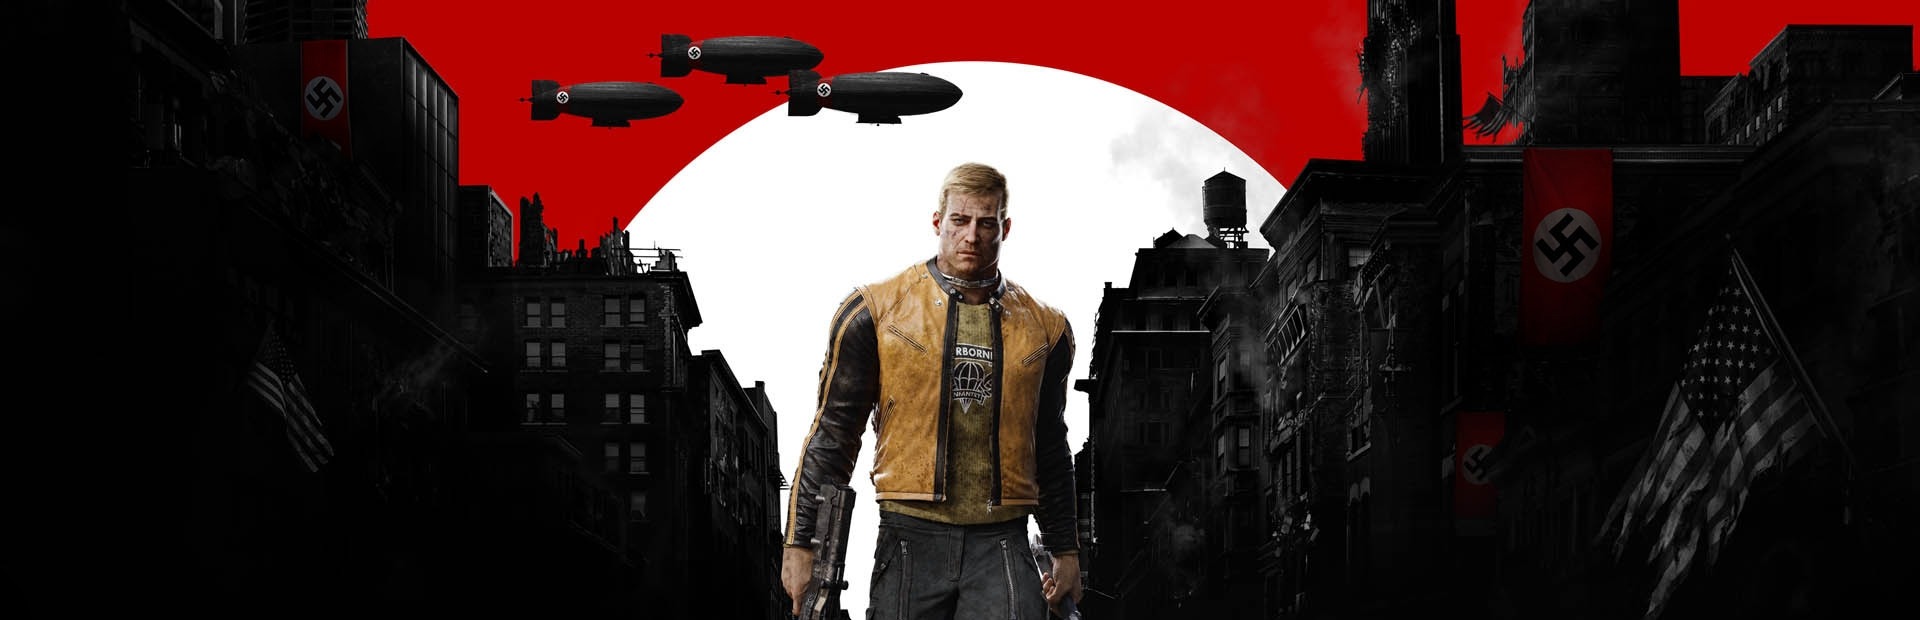 Wolfenstein II: The New Colossus- Deluxe Edition